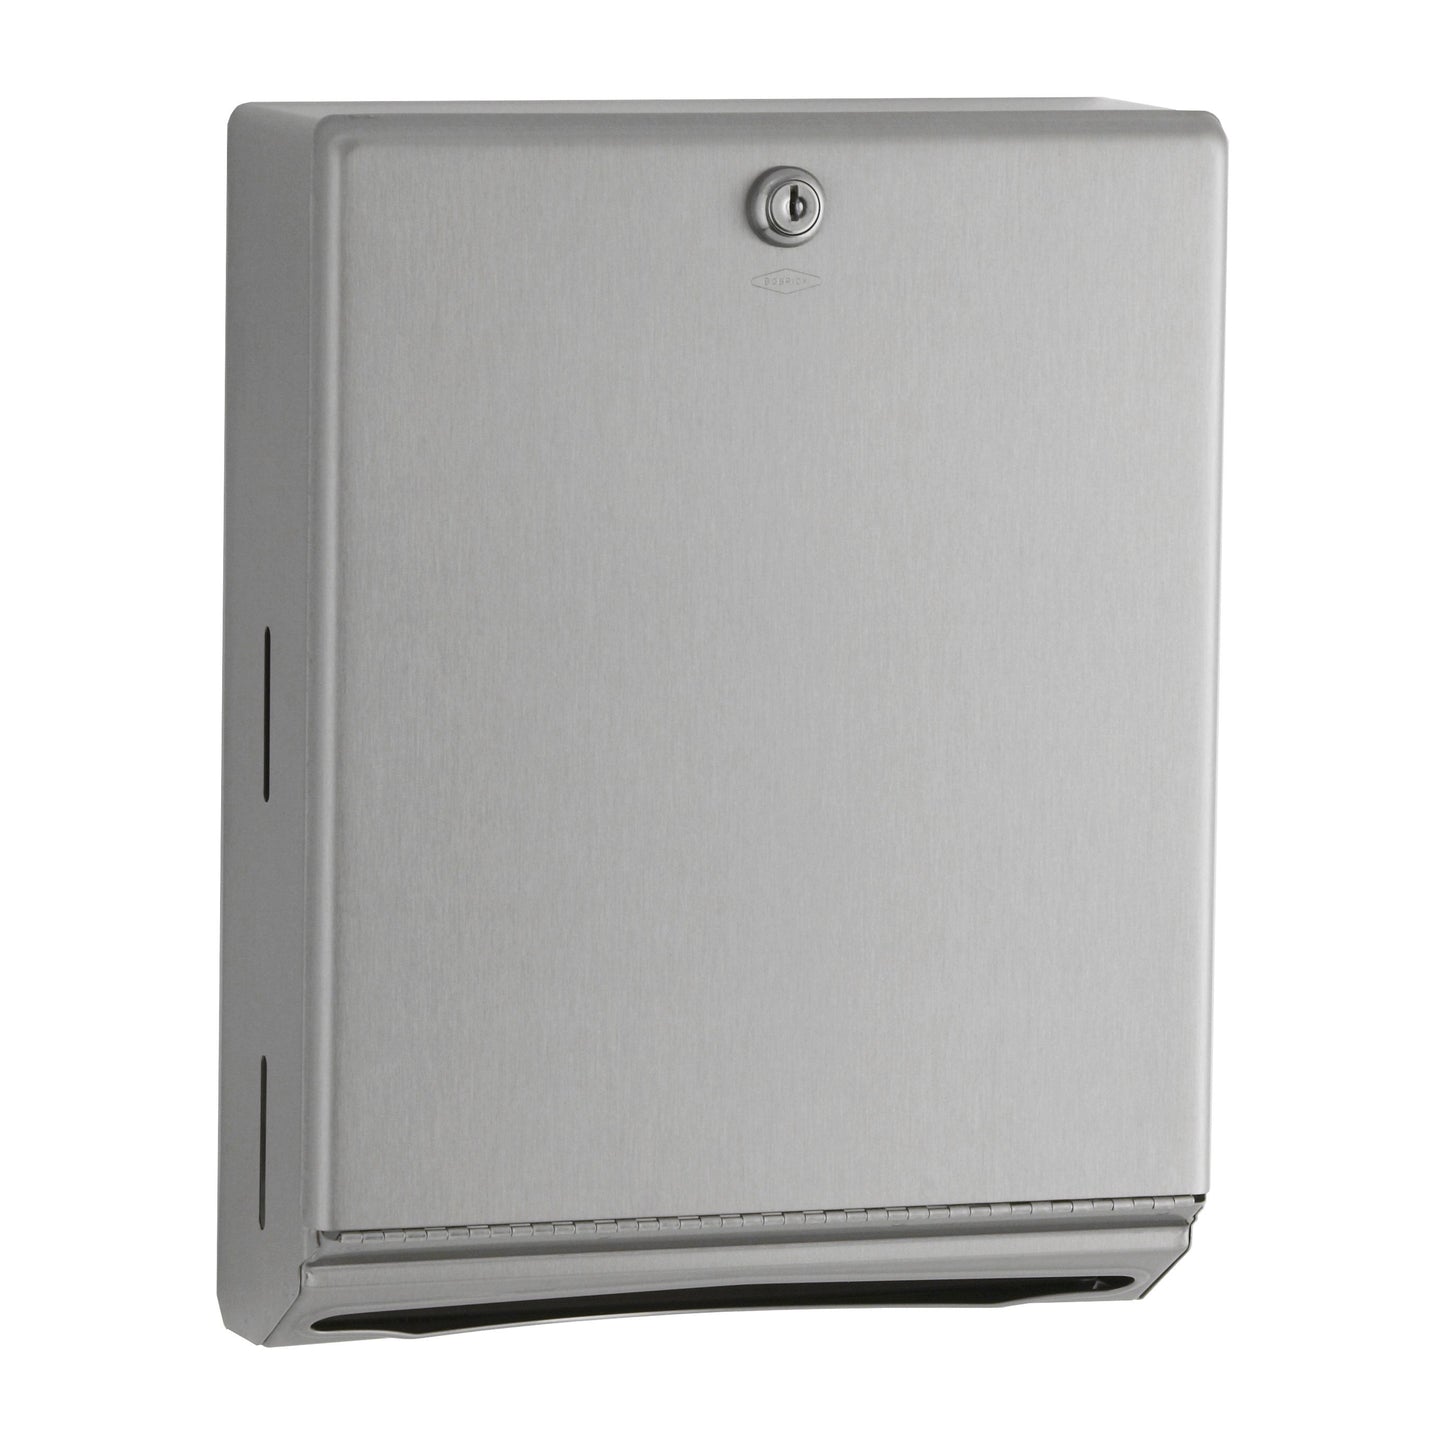 Bobrick 262 - ClassicSeries Surface Mounted Paper Towel Dispenser in Satin Stainless Steel